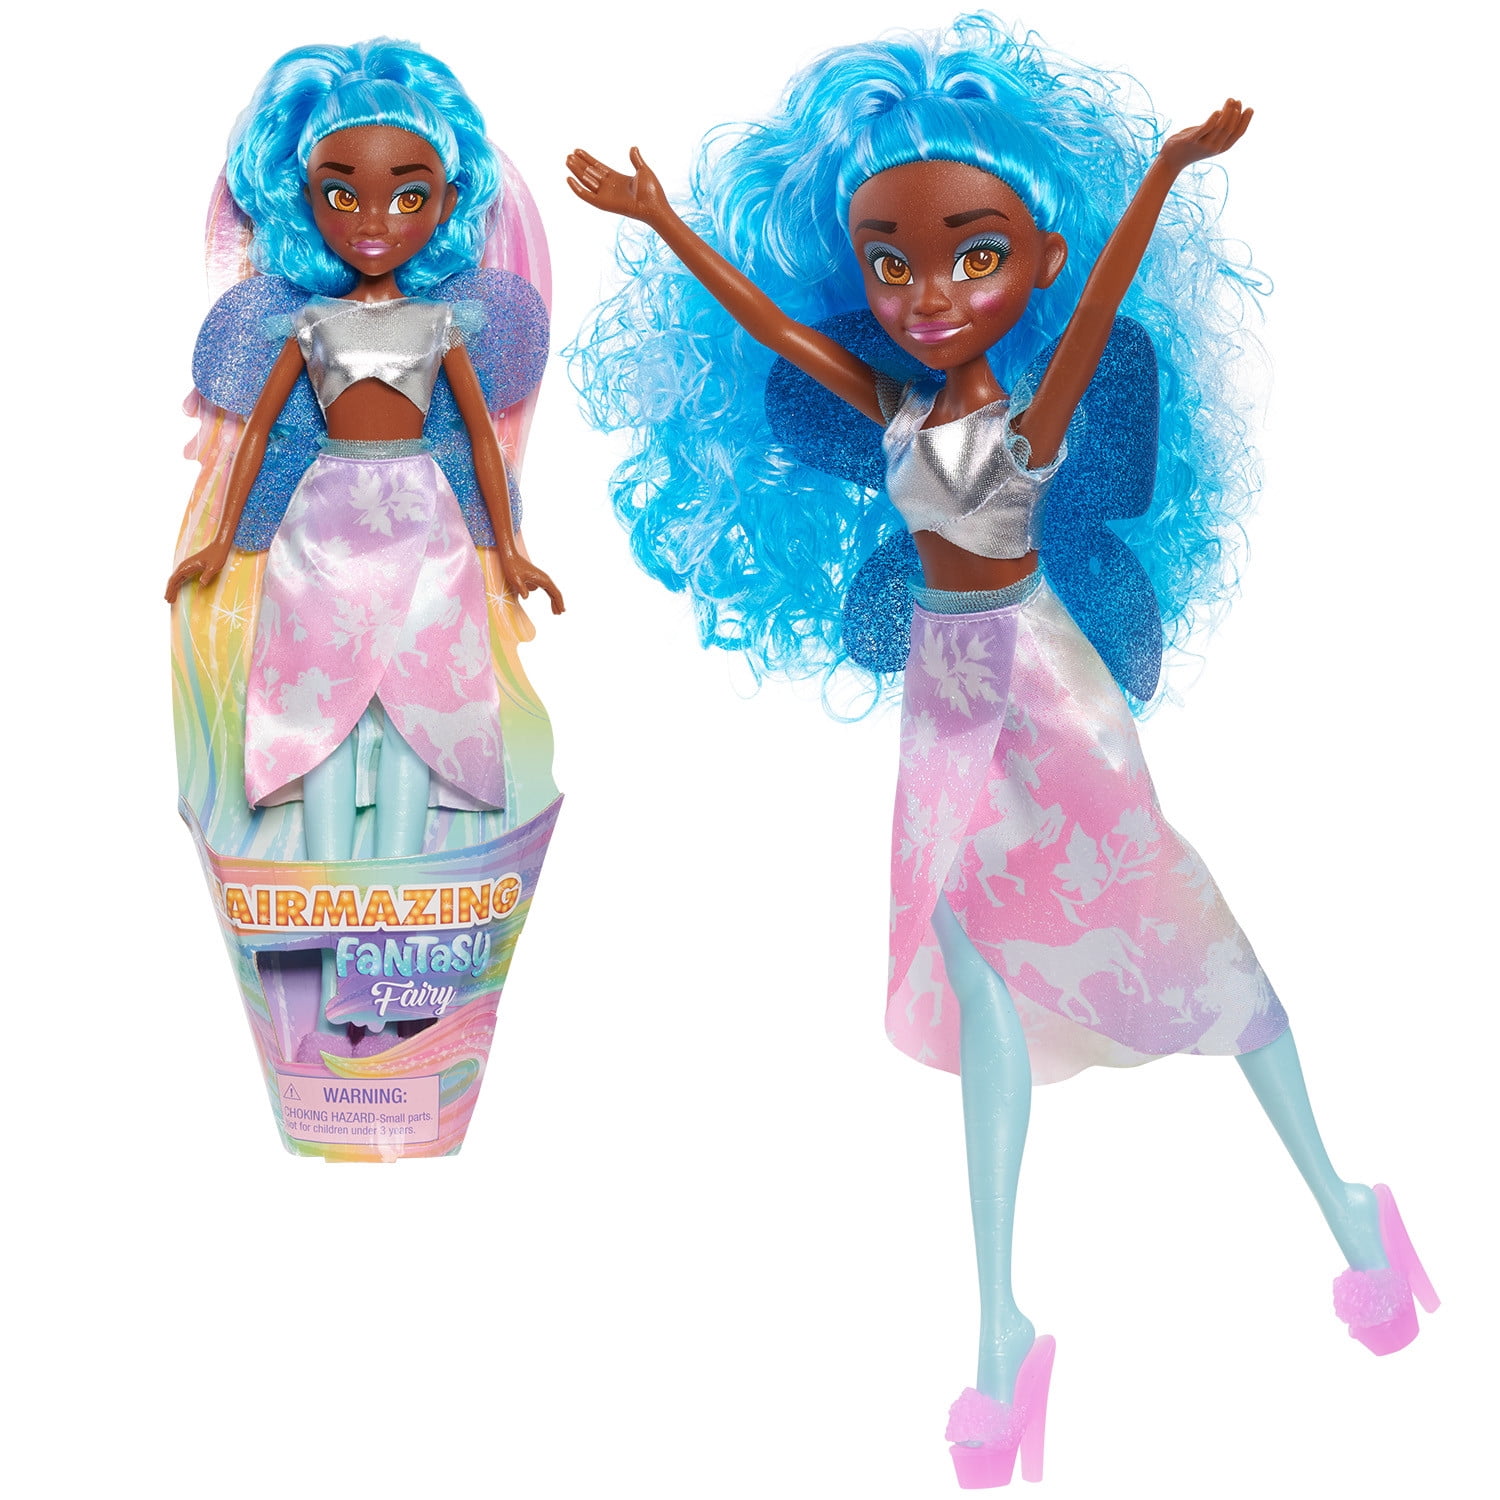 Hairmazing Fantasy Fashion Doll  Fantasy Fairy,  Kids Toys for Ages 3 Up, Gifts and Presents